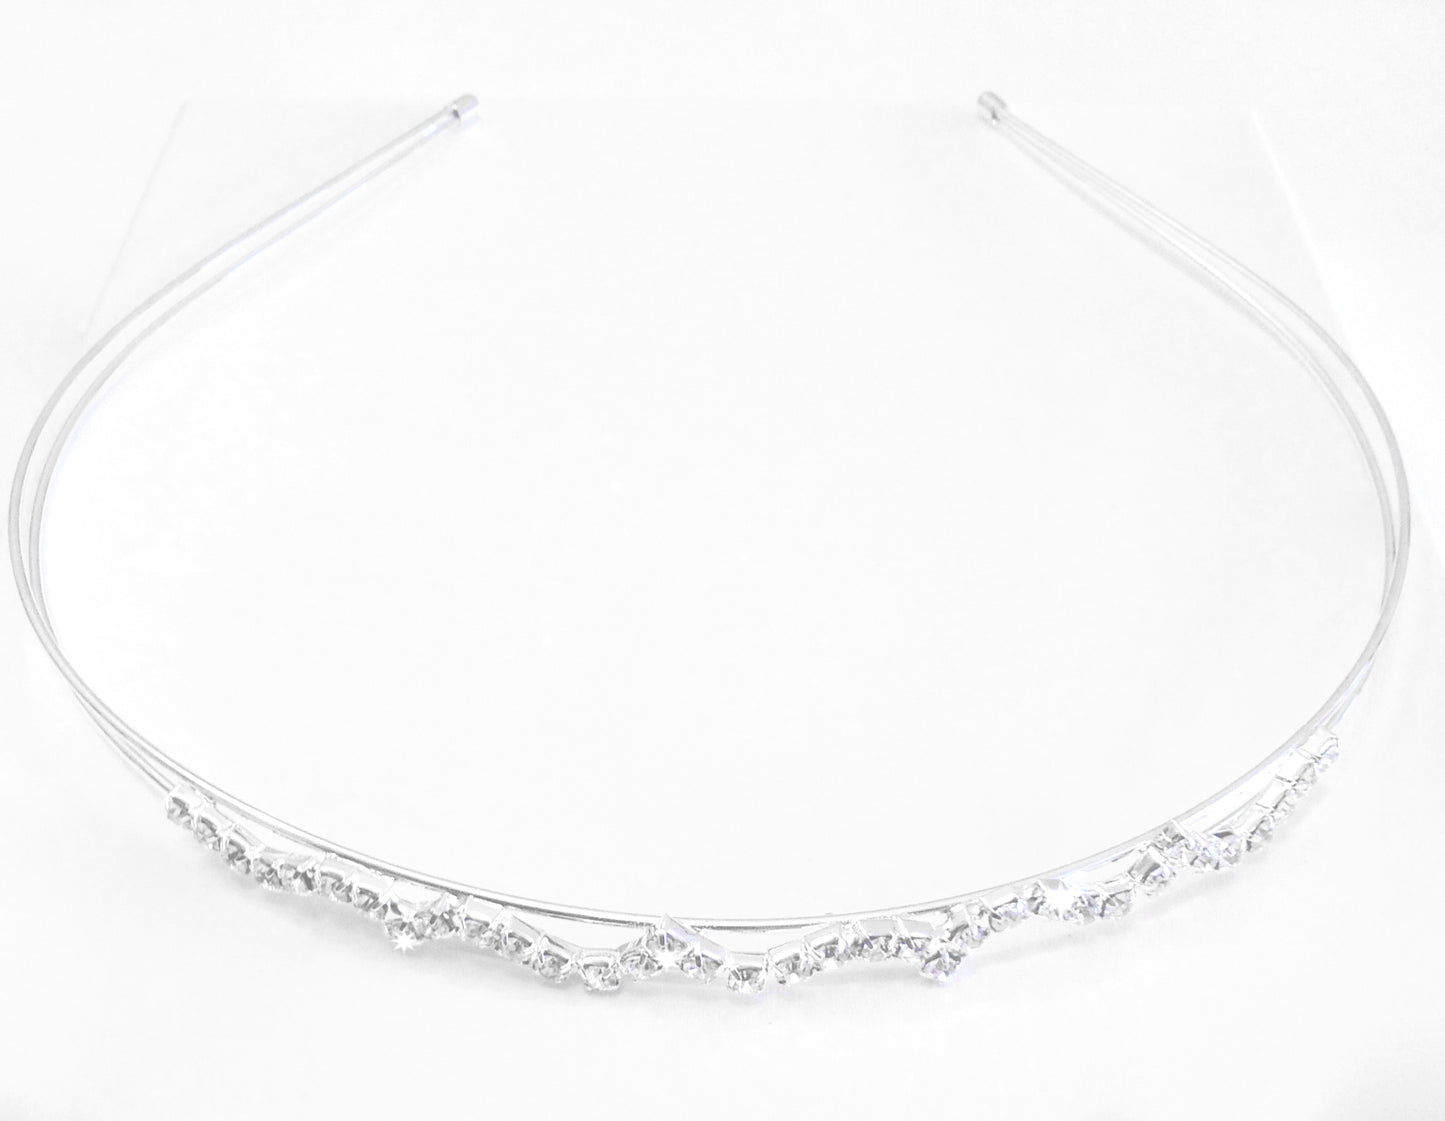 'Serenity' Crystal Tiara, ideal for a subtle yet elegant look or to wear at Parties or Special Occasions